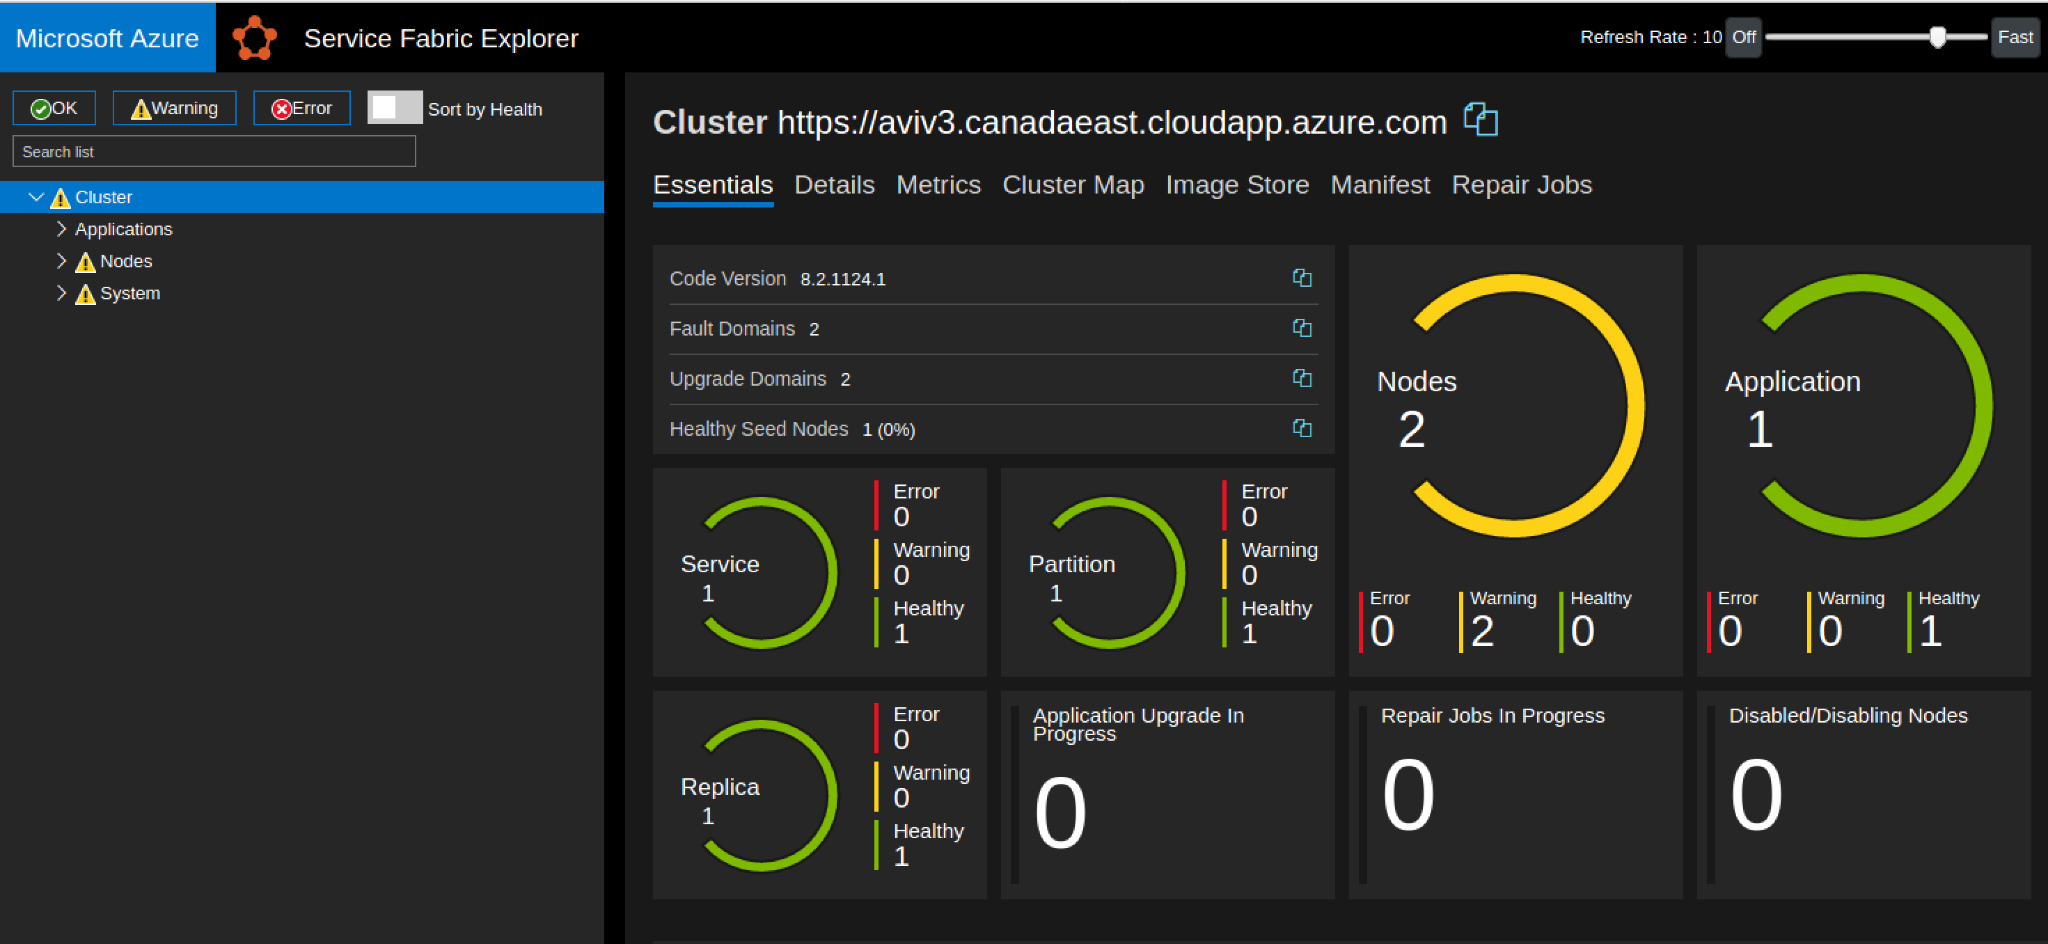 A screenshot of the interface called Service Fabric Explorer that is included in Microsoft Azure